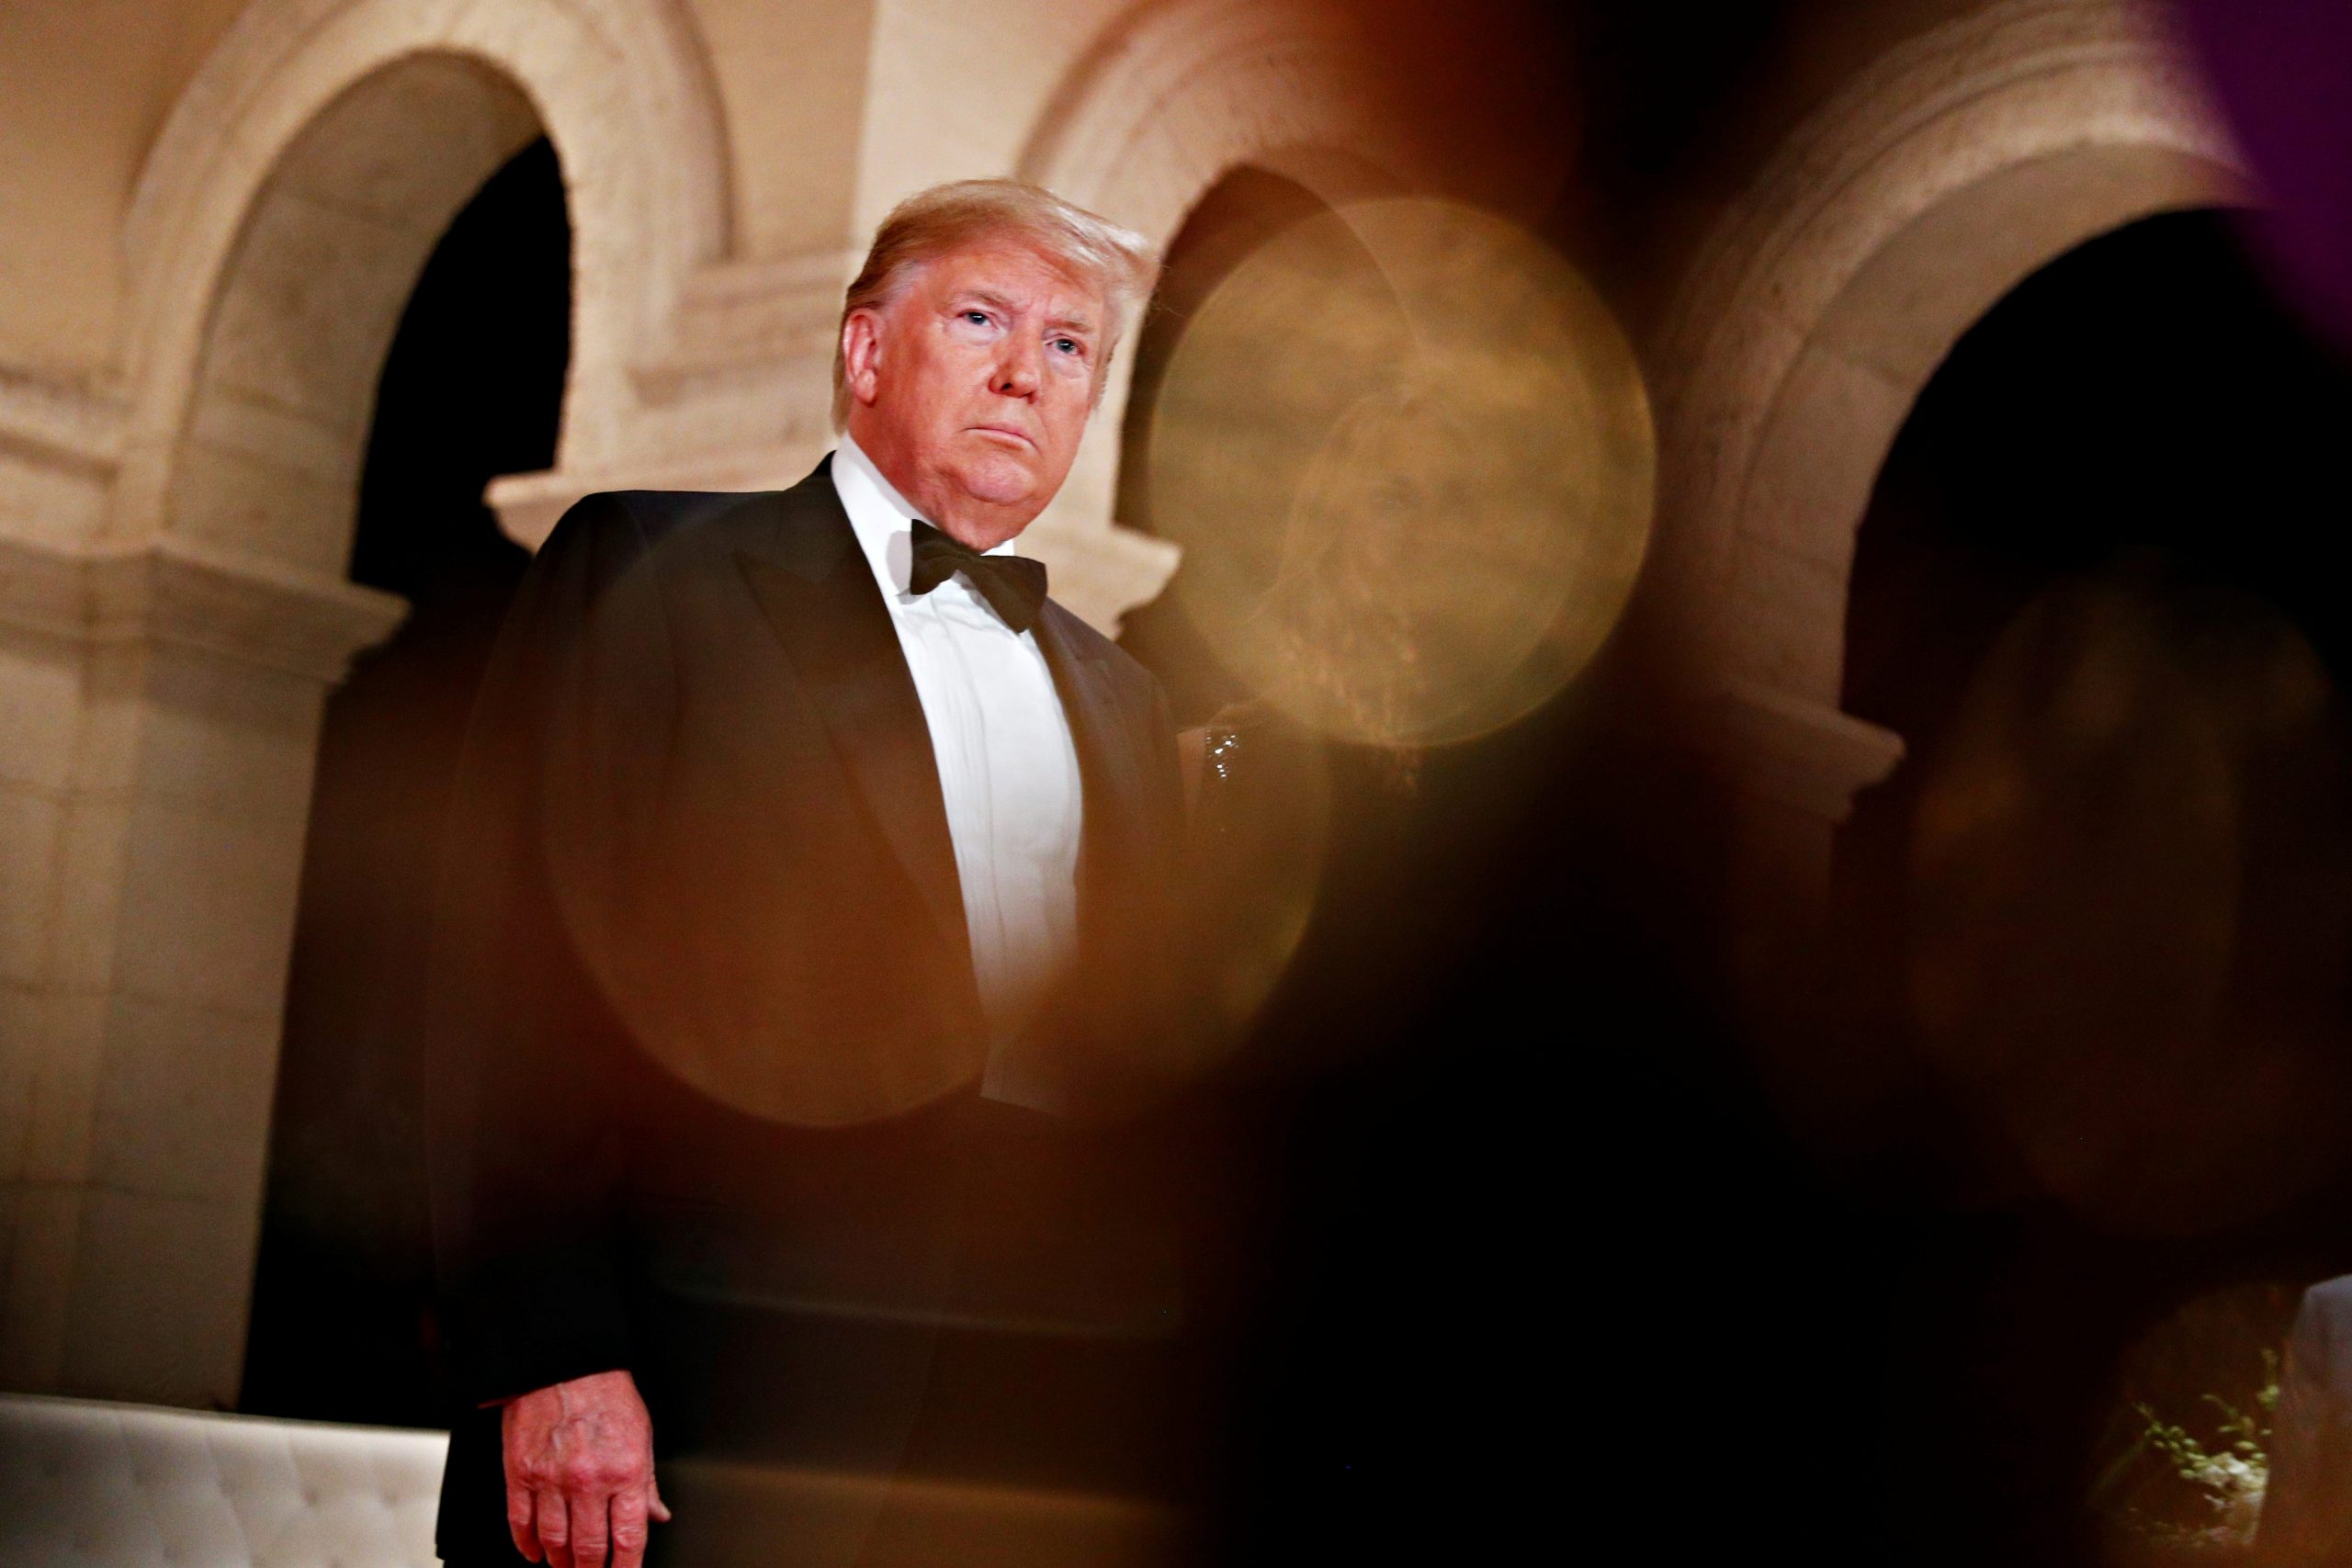 Trump in a black-and-white tuxedo under marble arches at Mar-a-Lago